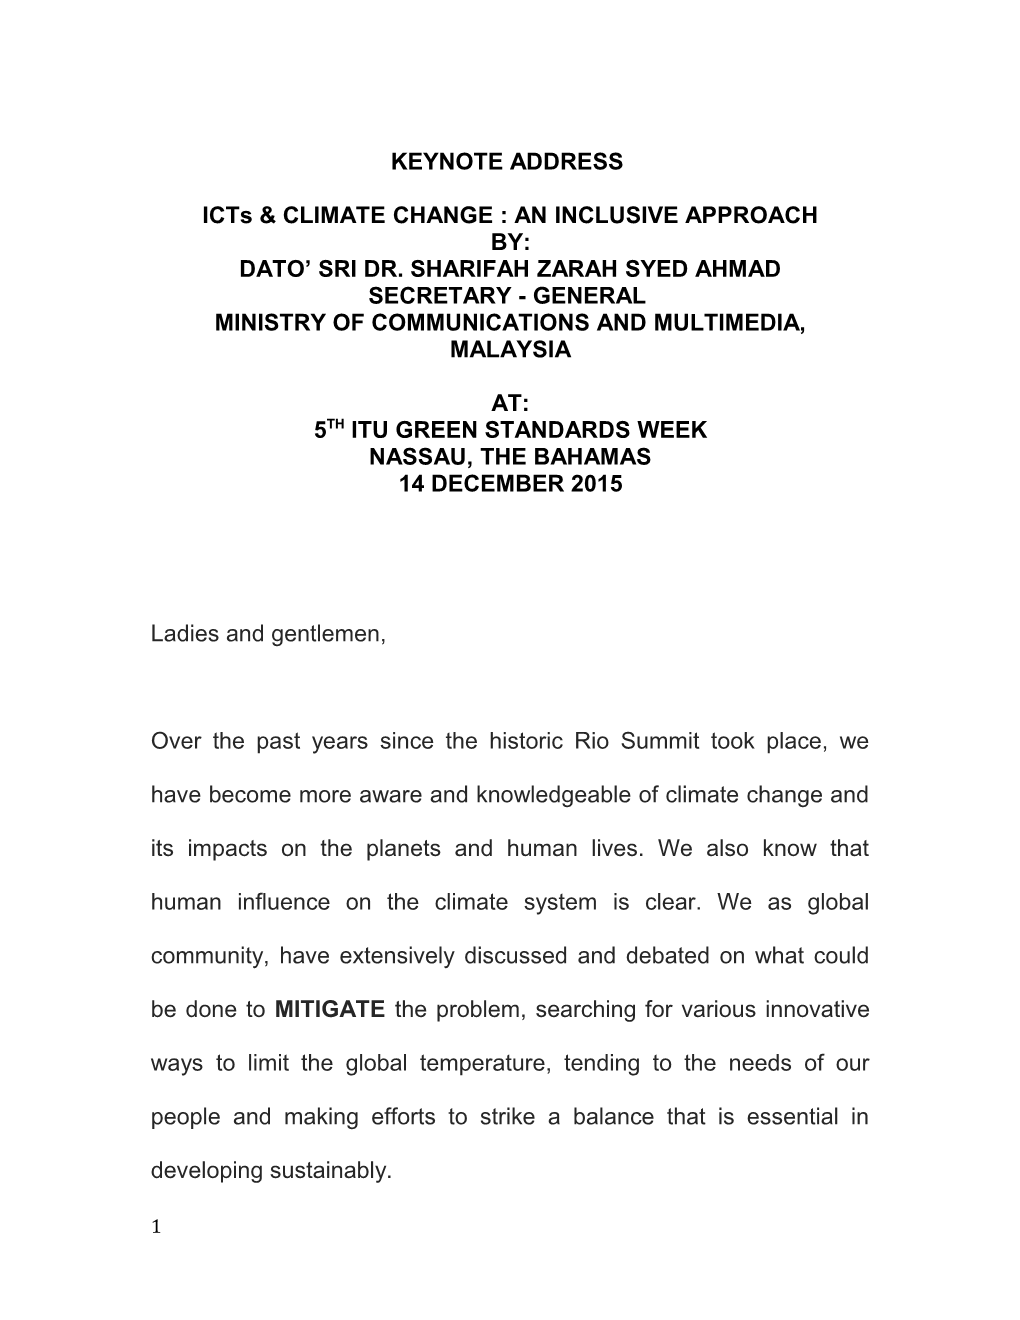 Icts & CLIMATE CHANGE : an INCLUSIVE APPROACH